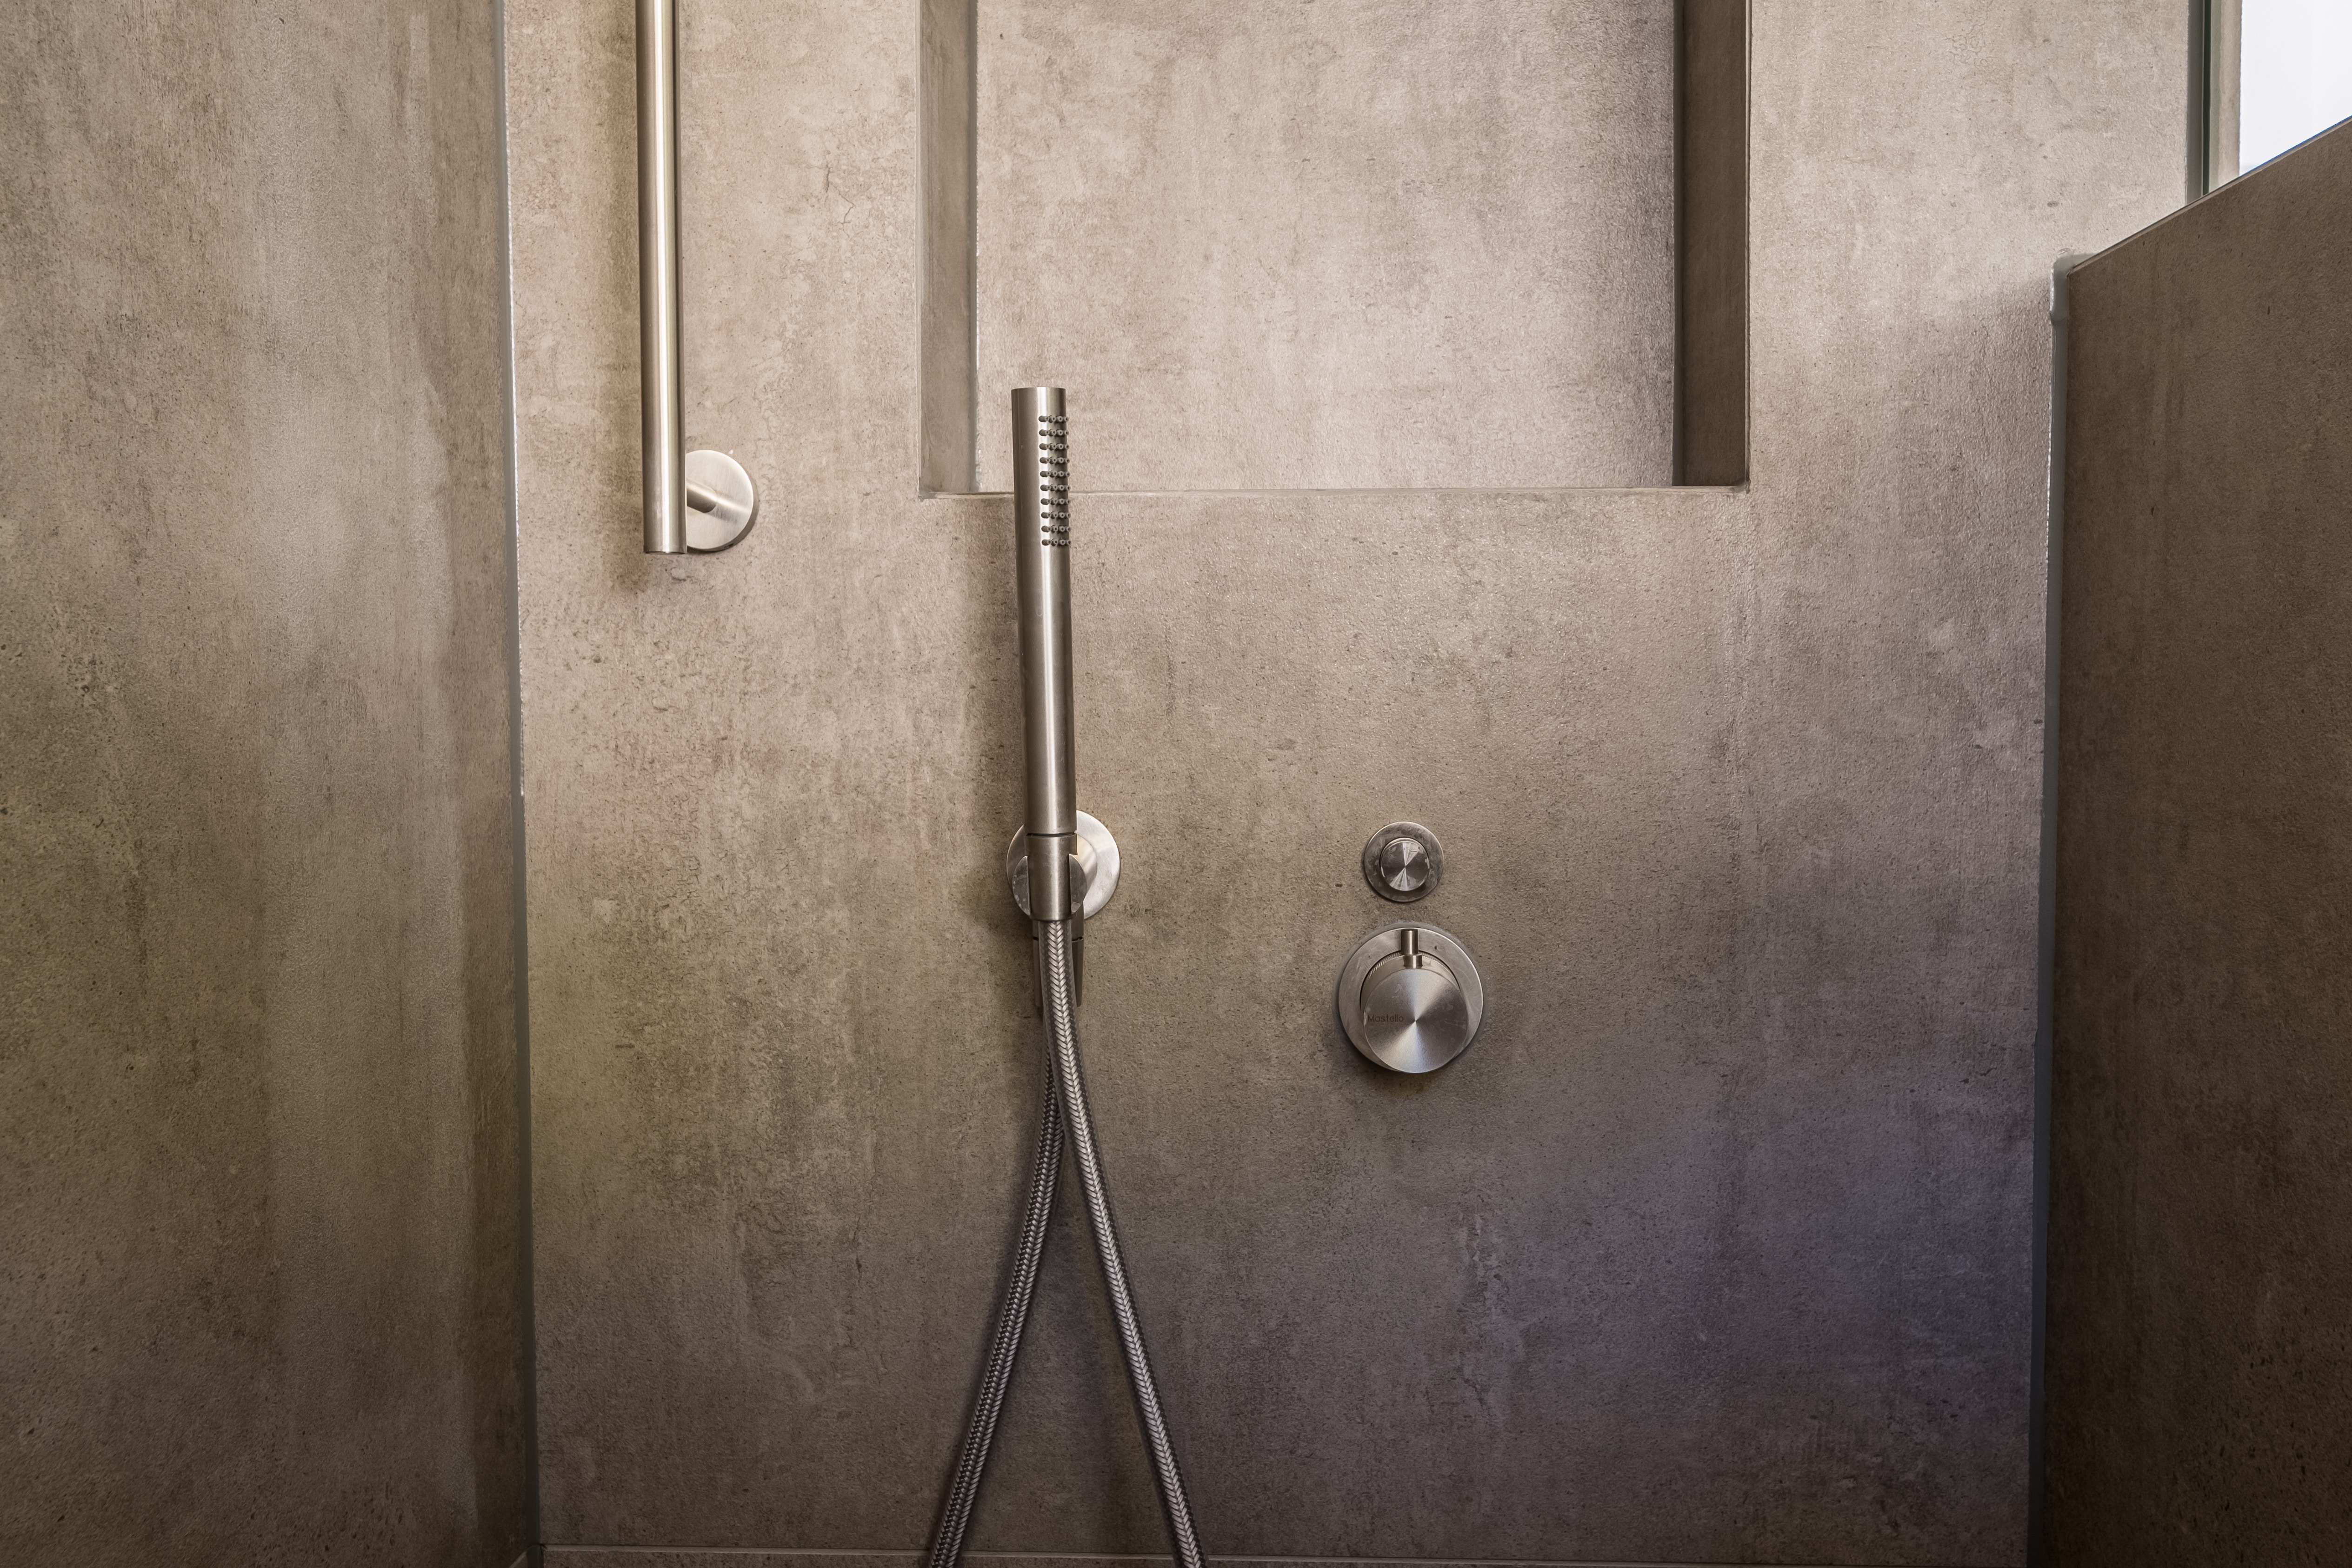 https://www.wholesaledomestic.com/product_images/uploaded_images/concrete-shower-wall.jpg